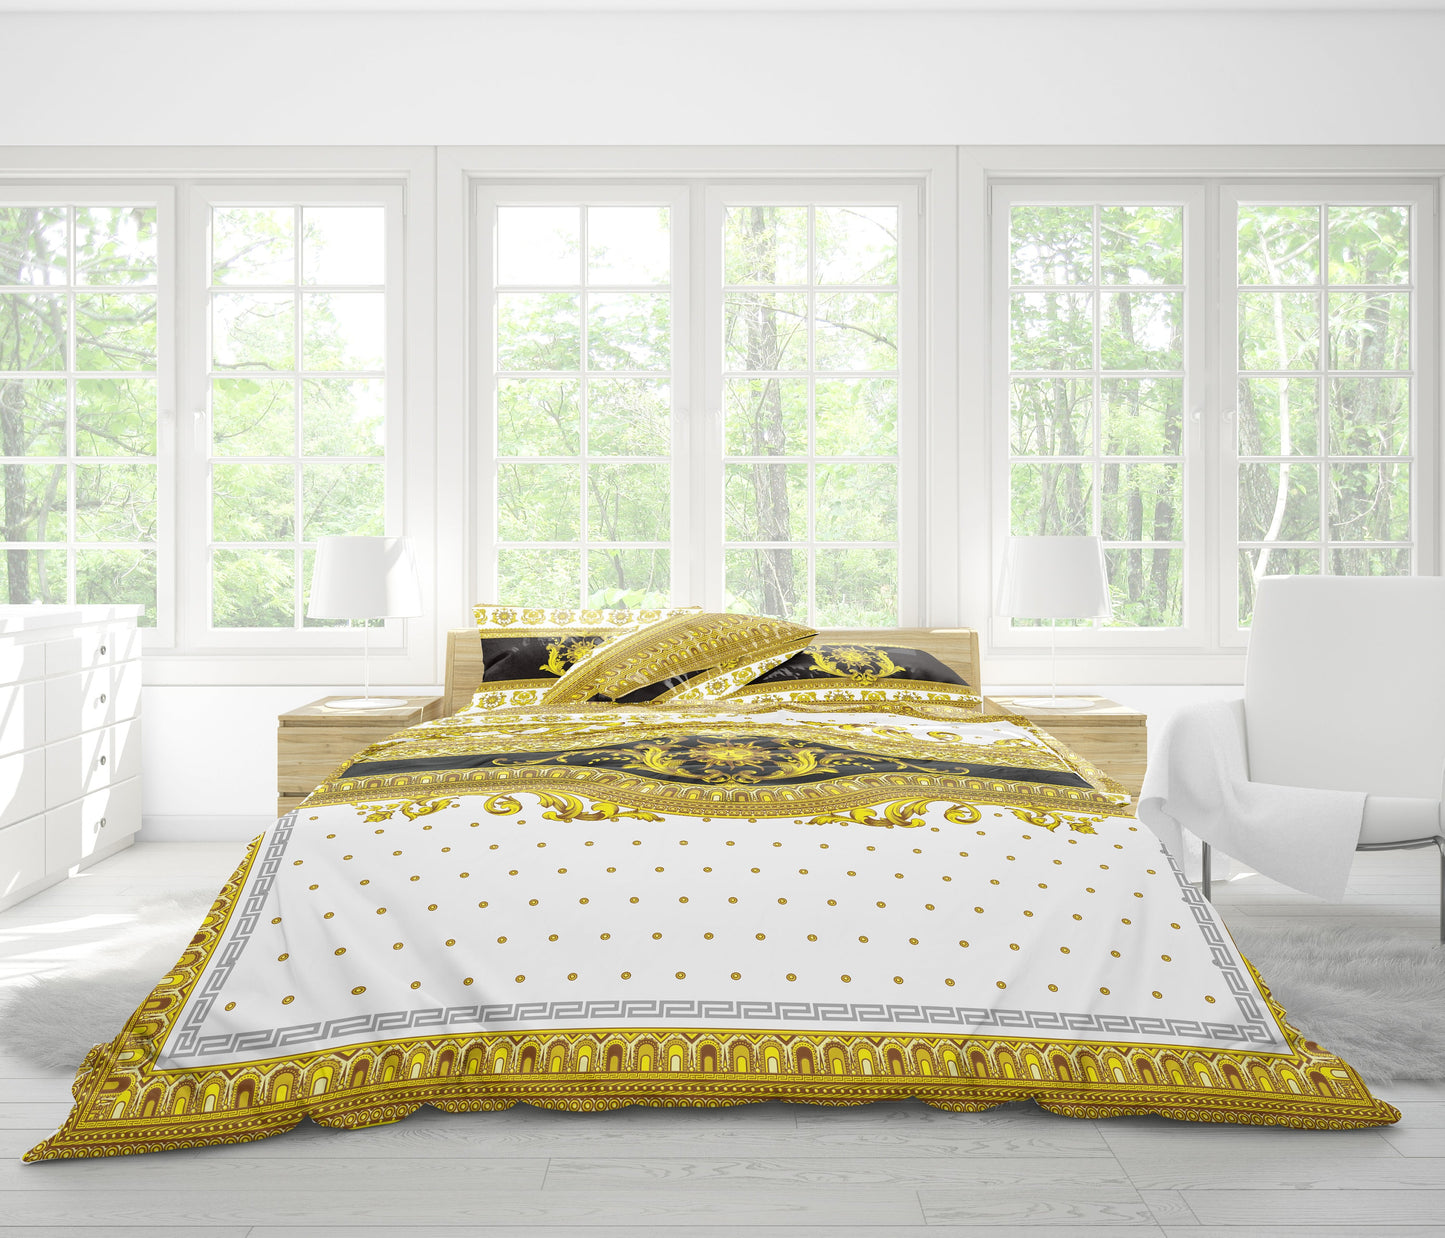 Baroque Eccentric Yellow Personalised Bedding set • your LOGO\letter can be placed • Reversible design • Cotton • microfiber • faux silk